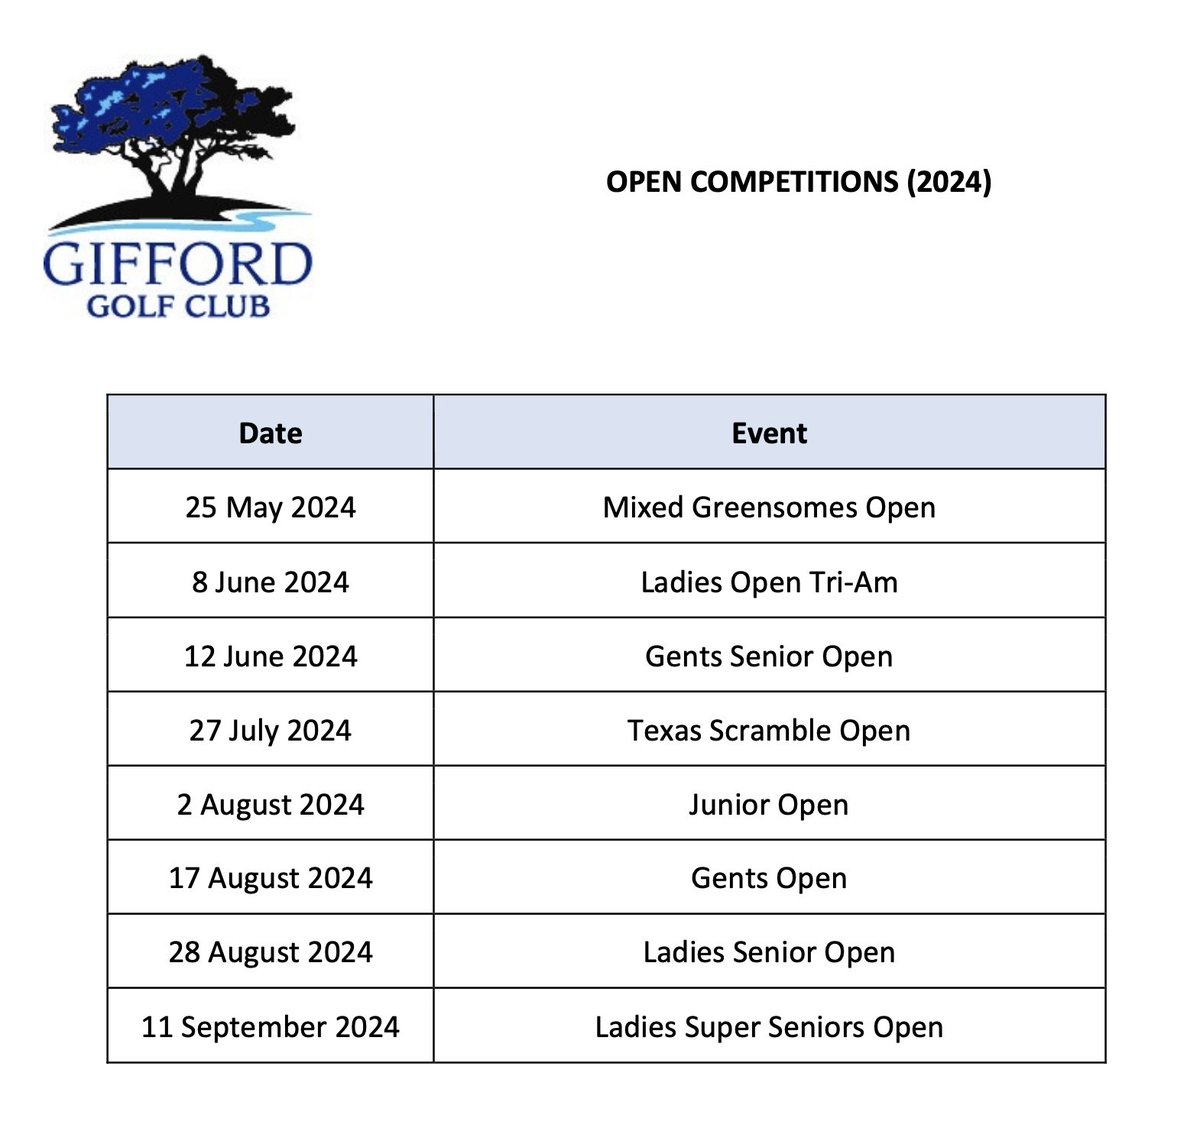 Competition time! Our Open Competition schedule is now open and available to book. Full details and application forms are available on our website. Come and enjoy East Lothian's Golfing Hidden Gem! #GiffordGolfClub #HiddenGems #ScotGolfCoast @ScotGolfCoast @goeastlothian